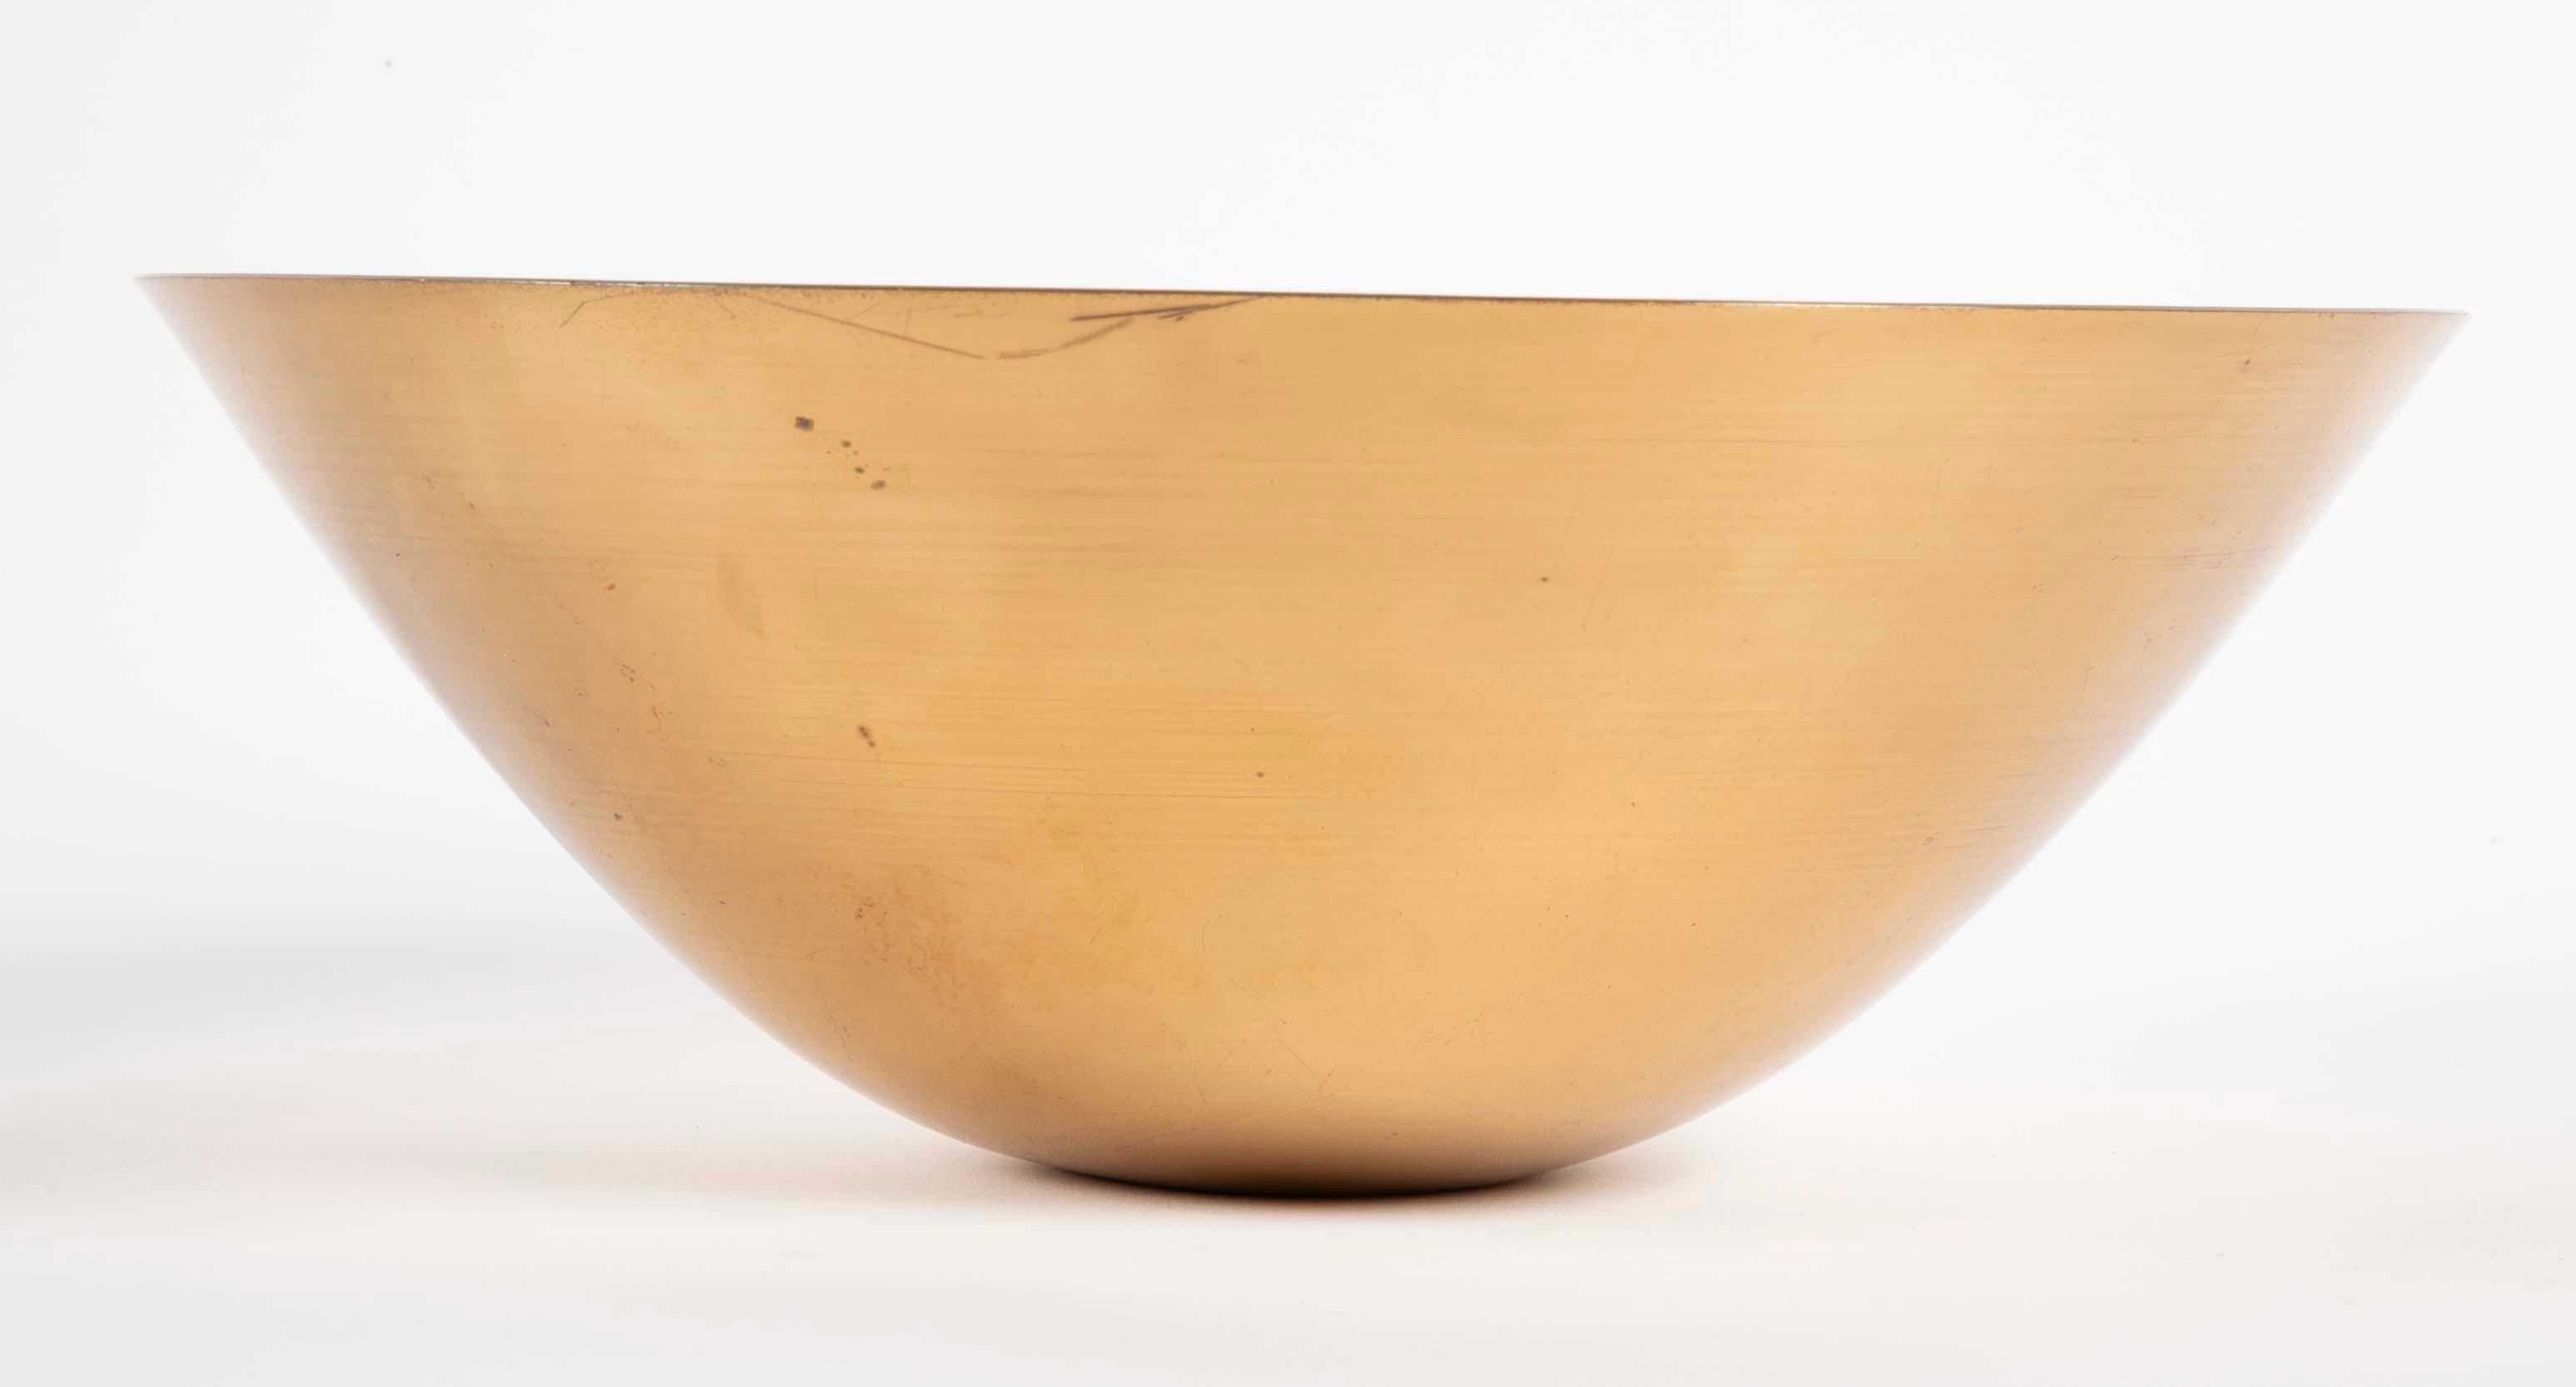 A signed, hand spun brass flared bowl by Ronald Hayes Pearson. (American. 1924 - 1996).